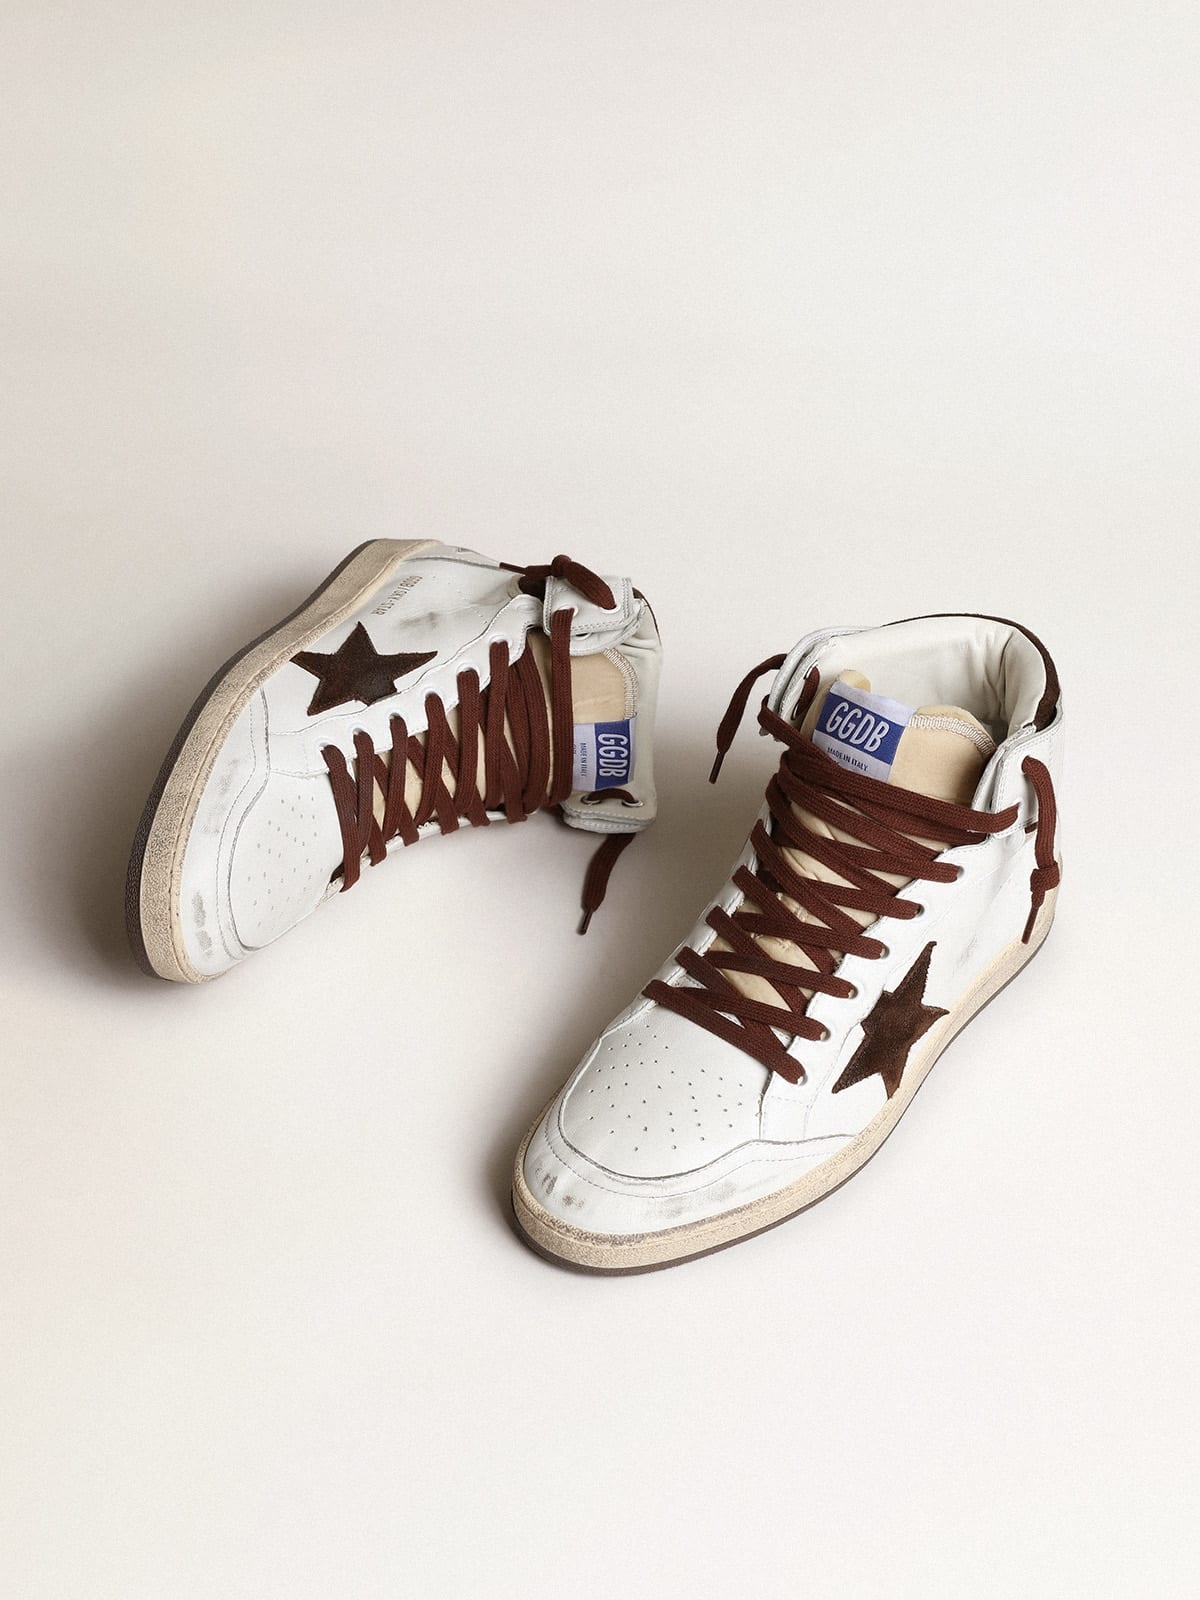 Men’s Sky-Star in white nappa leather with a chocolate suede star - 2